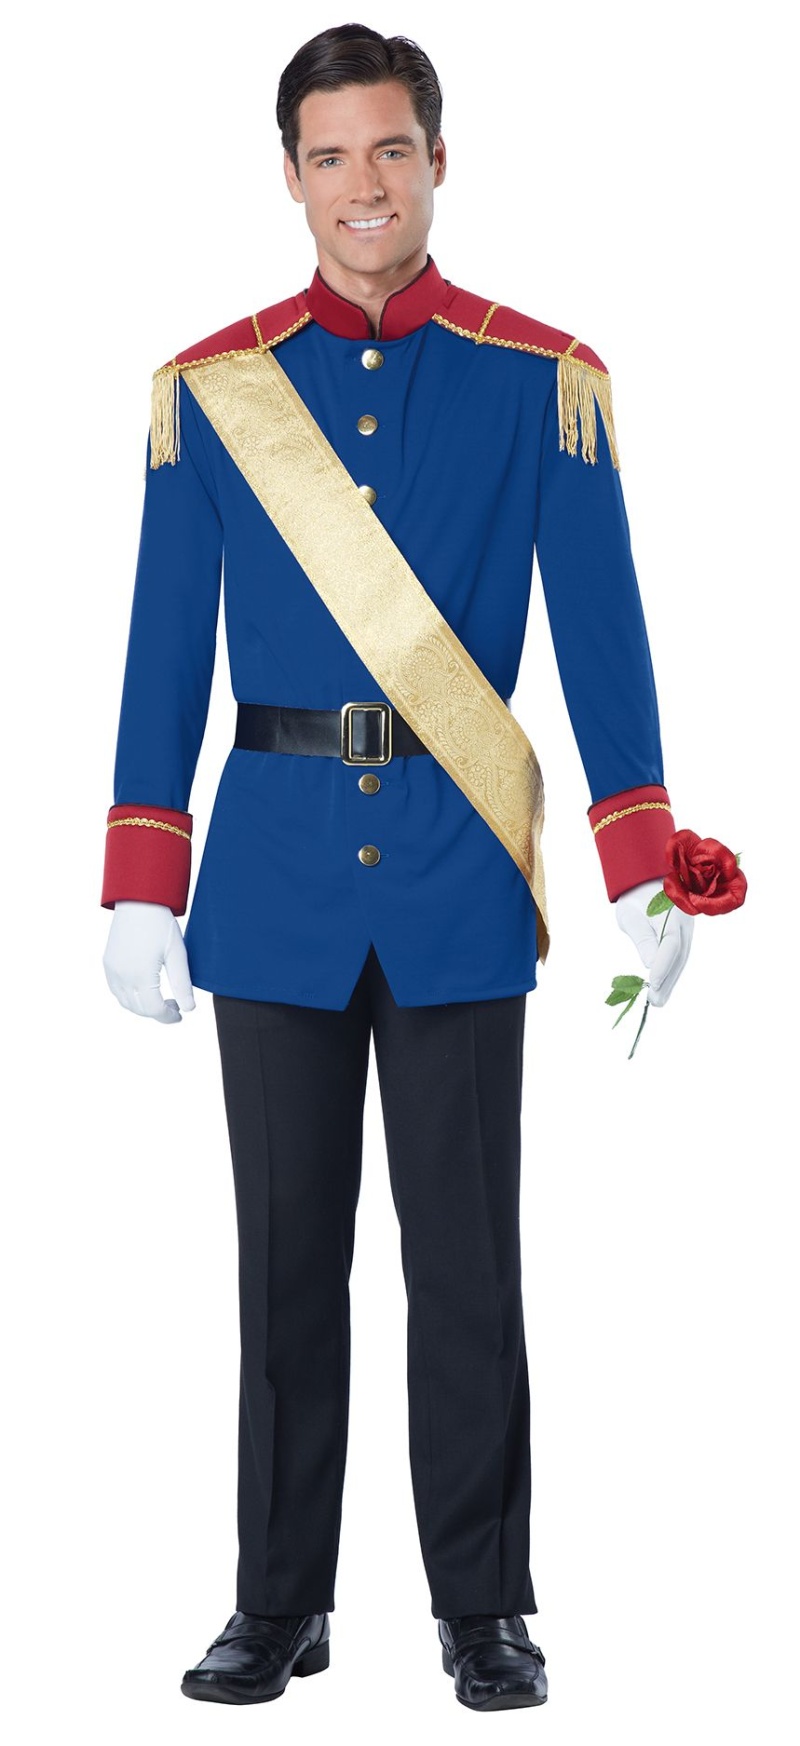 California Costumes Men's Storybook Prince Costume, Blue/Red, Small